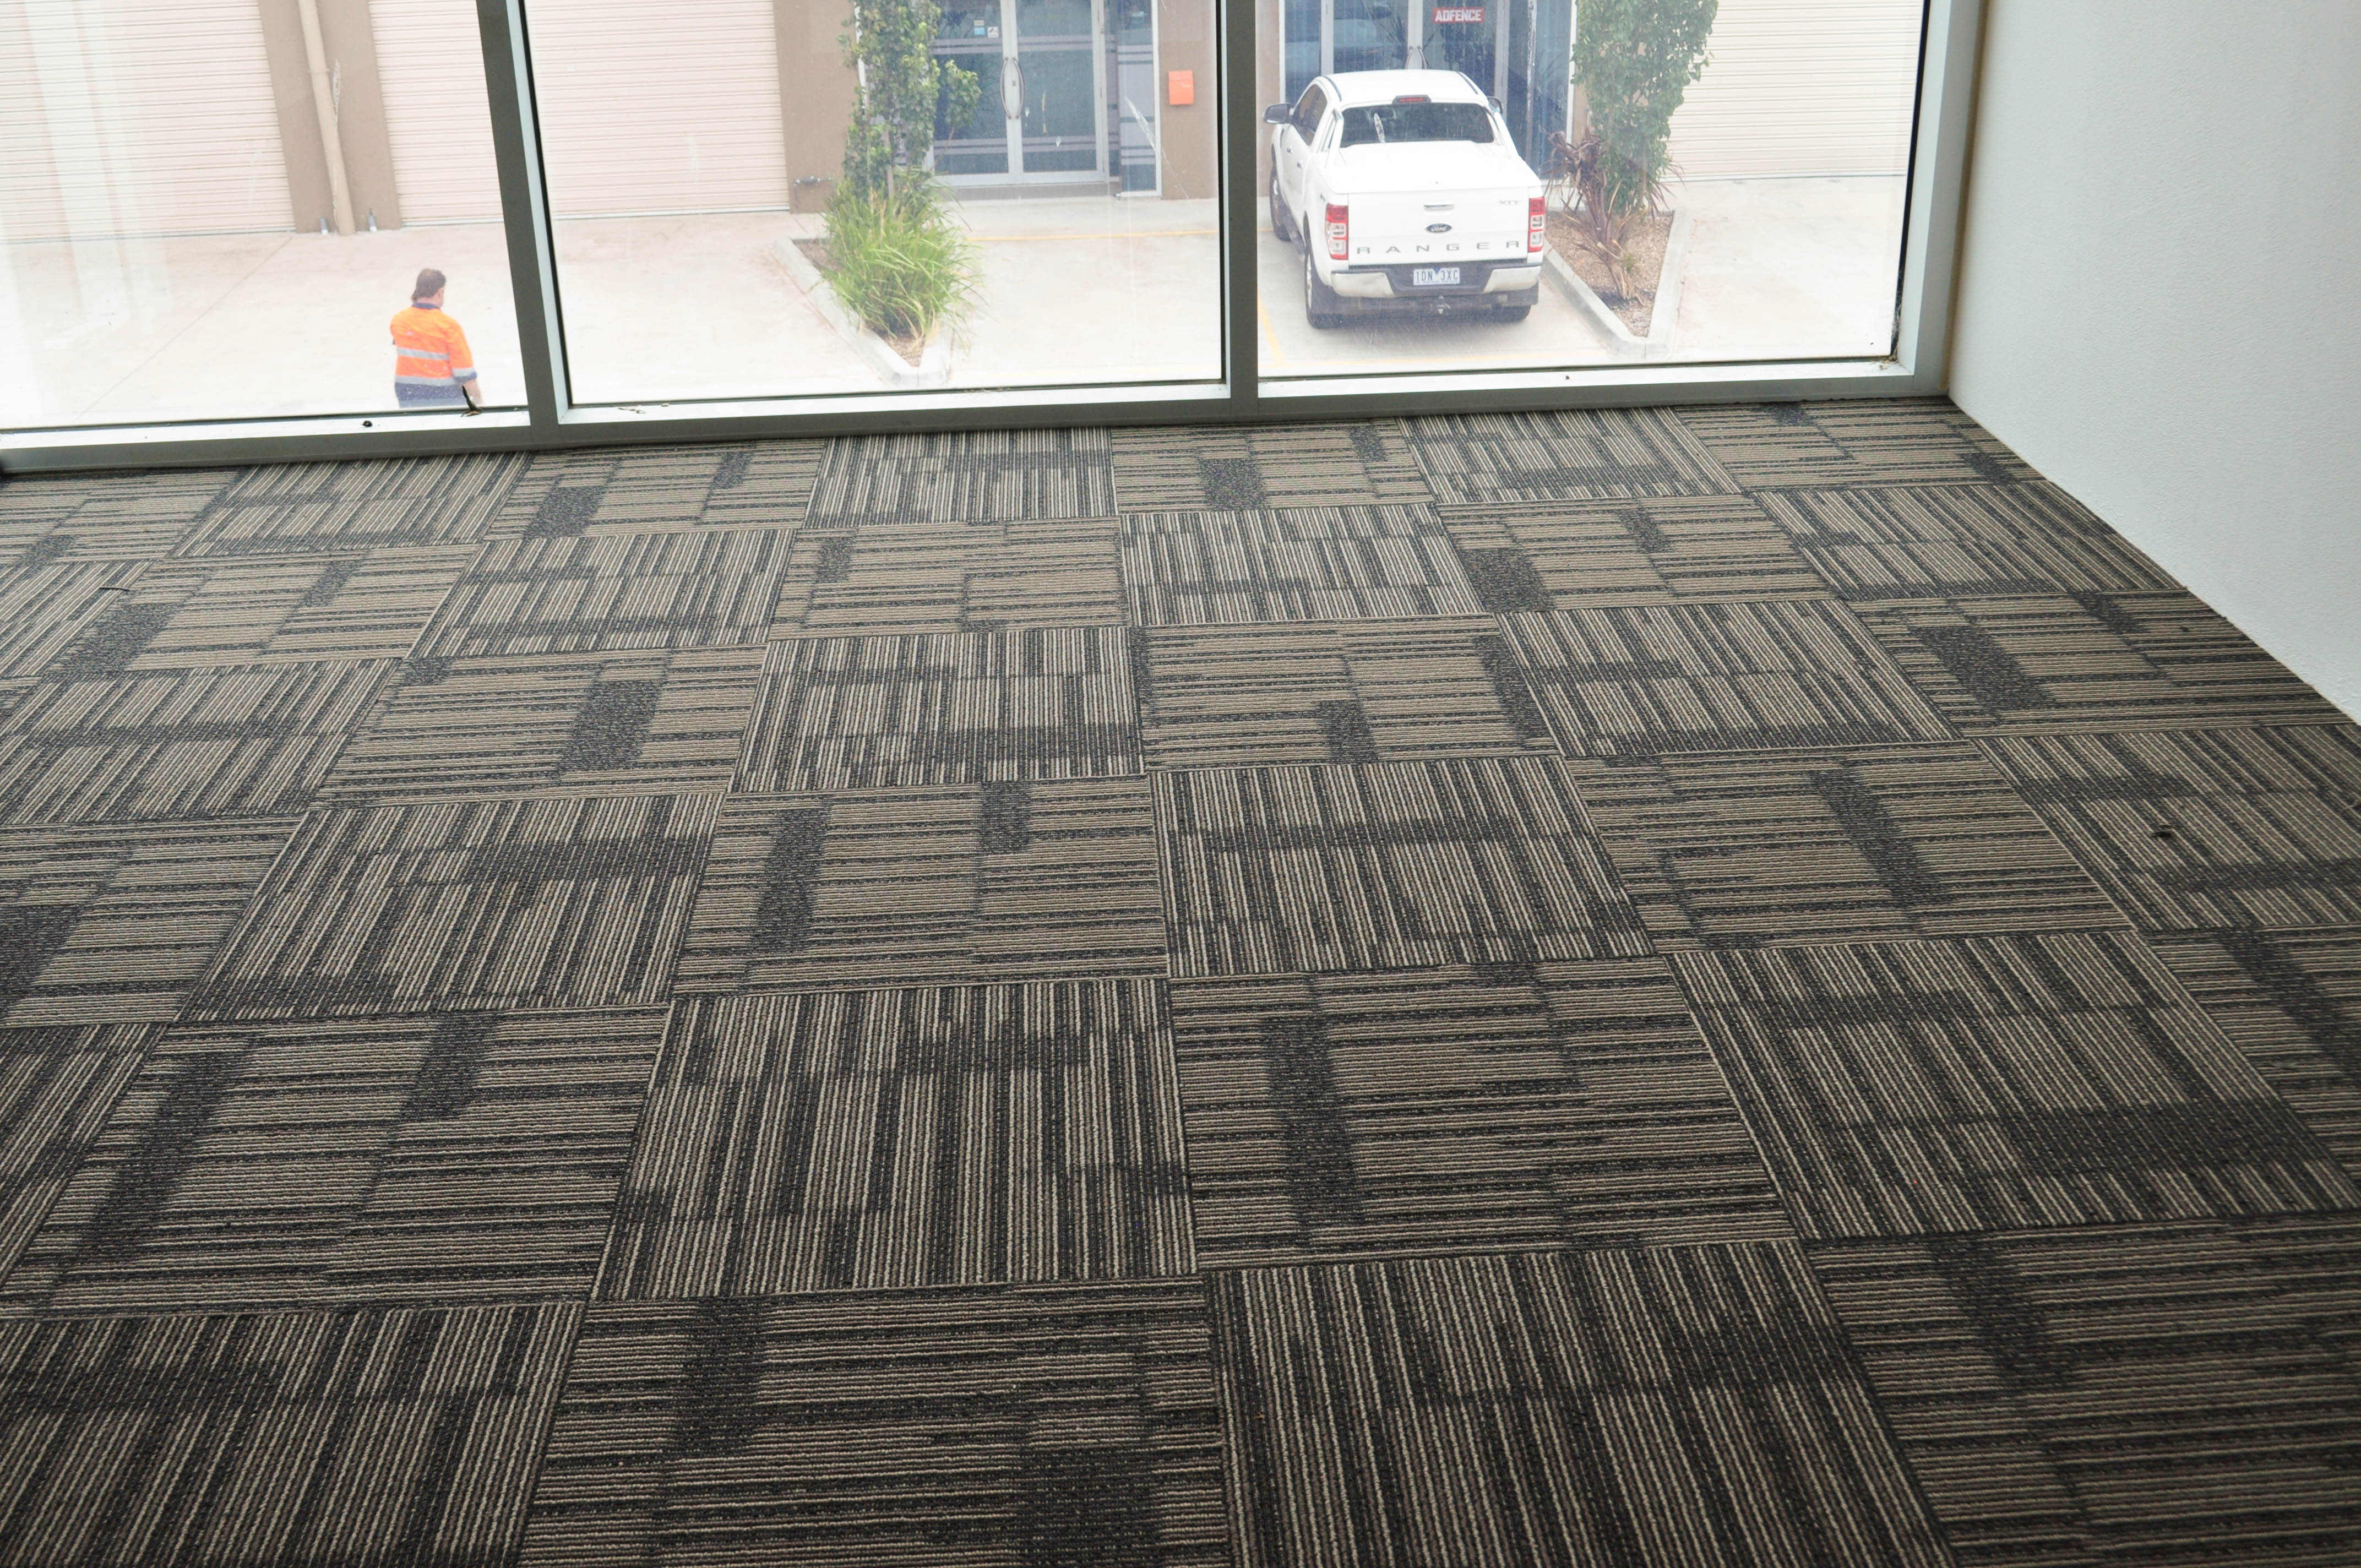 Showing a floor that has a patterned, beige carpet tile installed by Concord Floors on it. The building is in Derrimut.